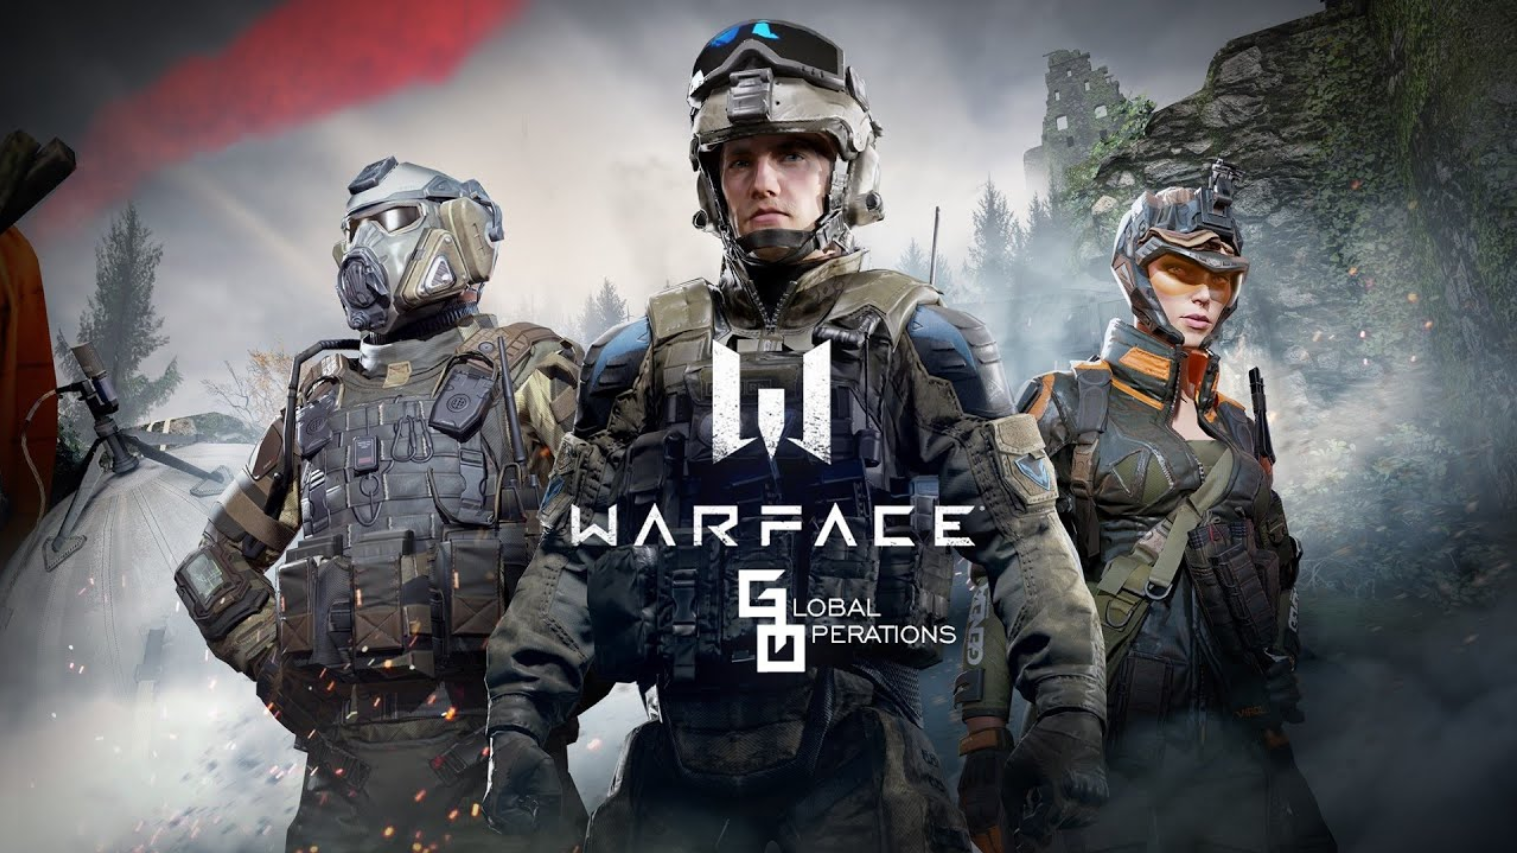 Alternative to Call of Duty Warface Global Operations on iPhone